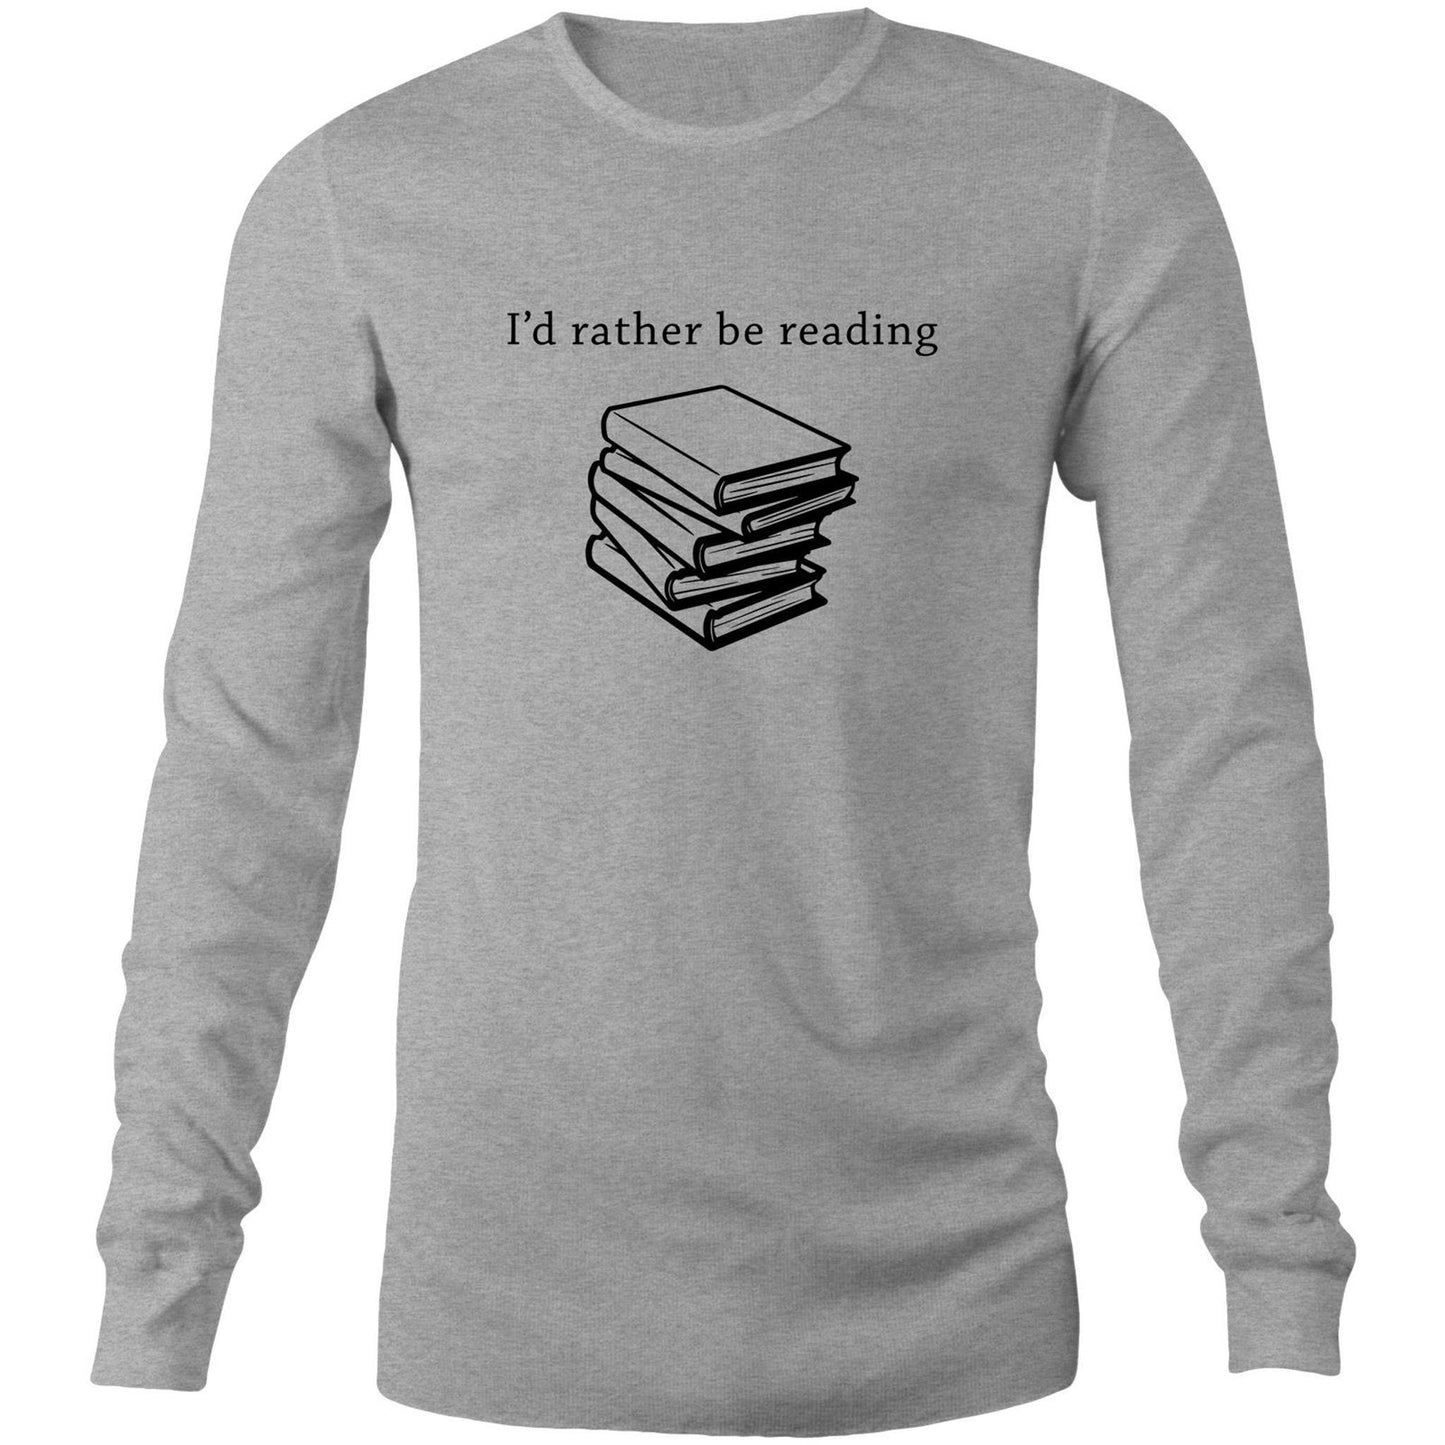 I'd Rather Be Reading - Long Sleeve T-Shirt Grey Marle Unisex Long Sleeve T-shirt Mens Womens